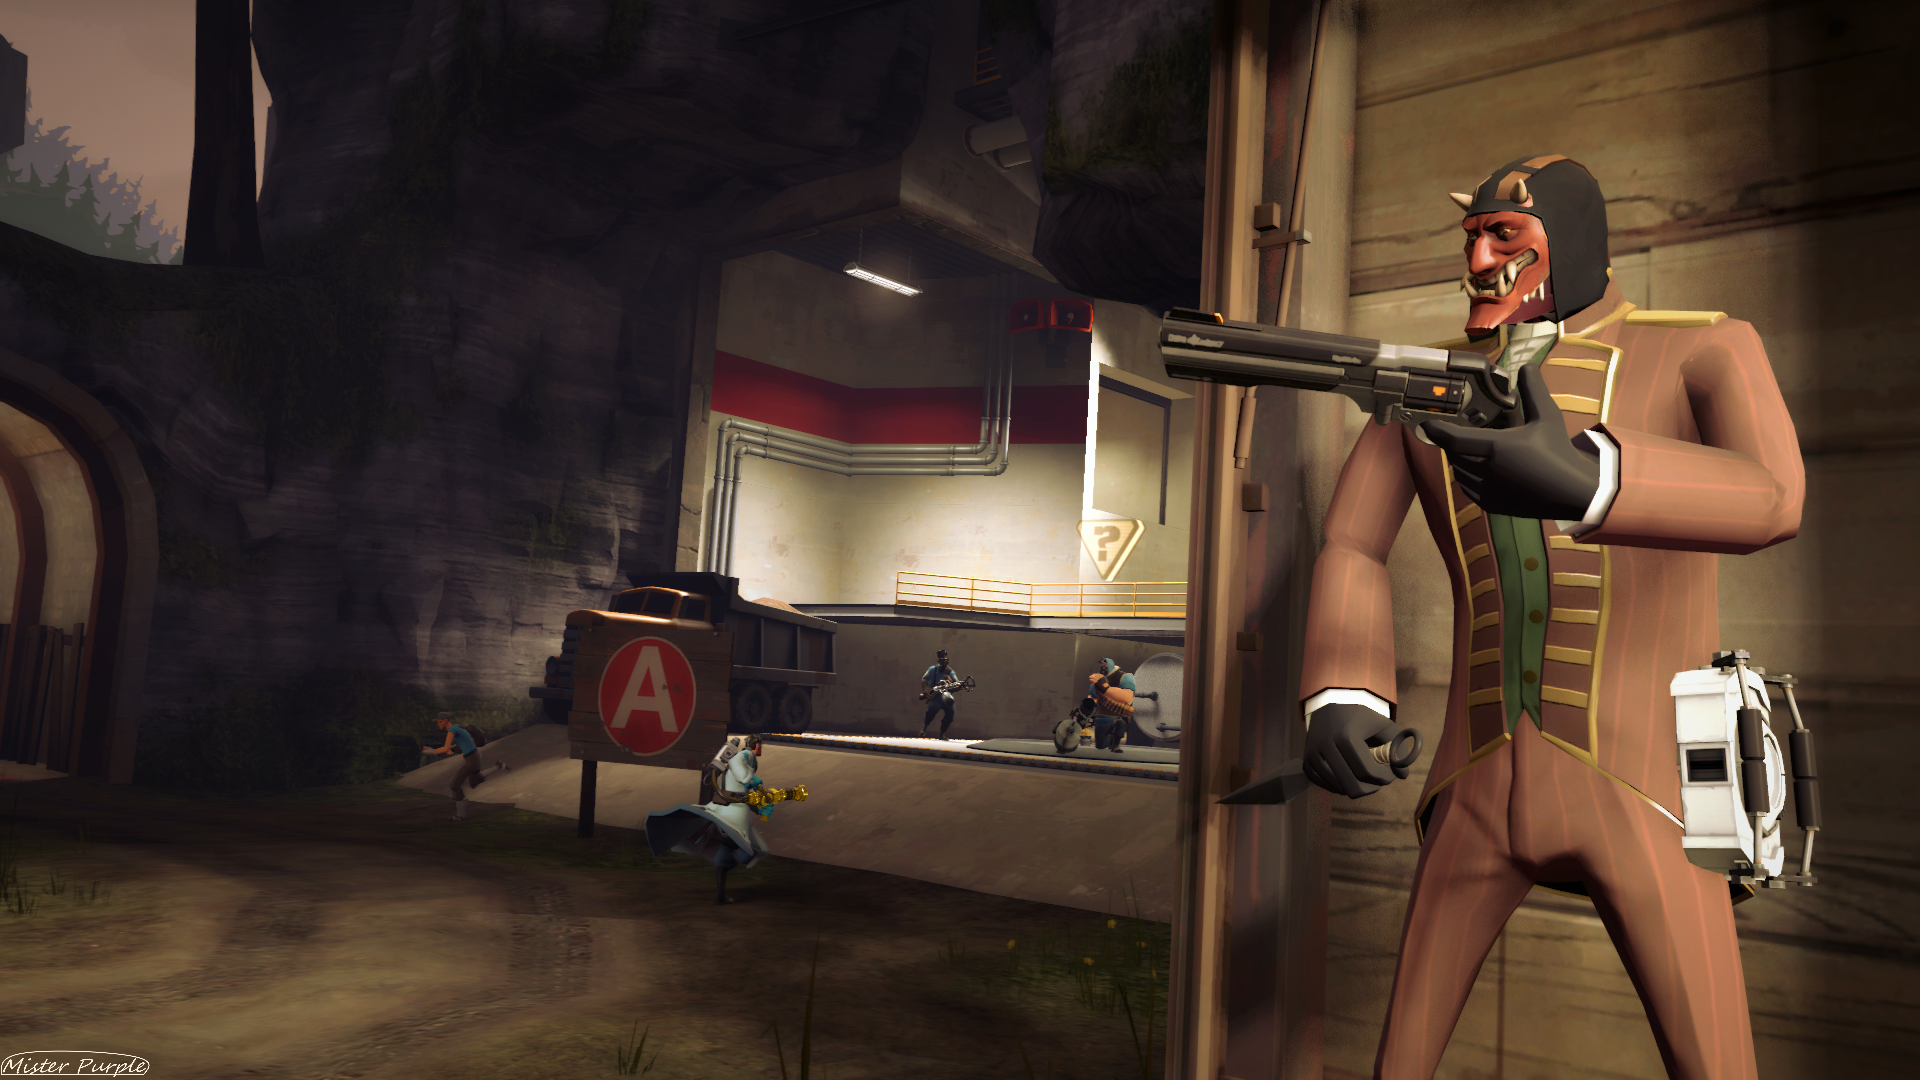 General 1920x1080 Team Fortress 2 Spy (TF2) Heavy (TF2) Medic (TF2) Scout (TF2) Pyro (TF2) video games PC gaming